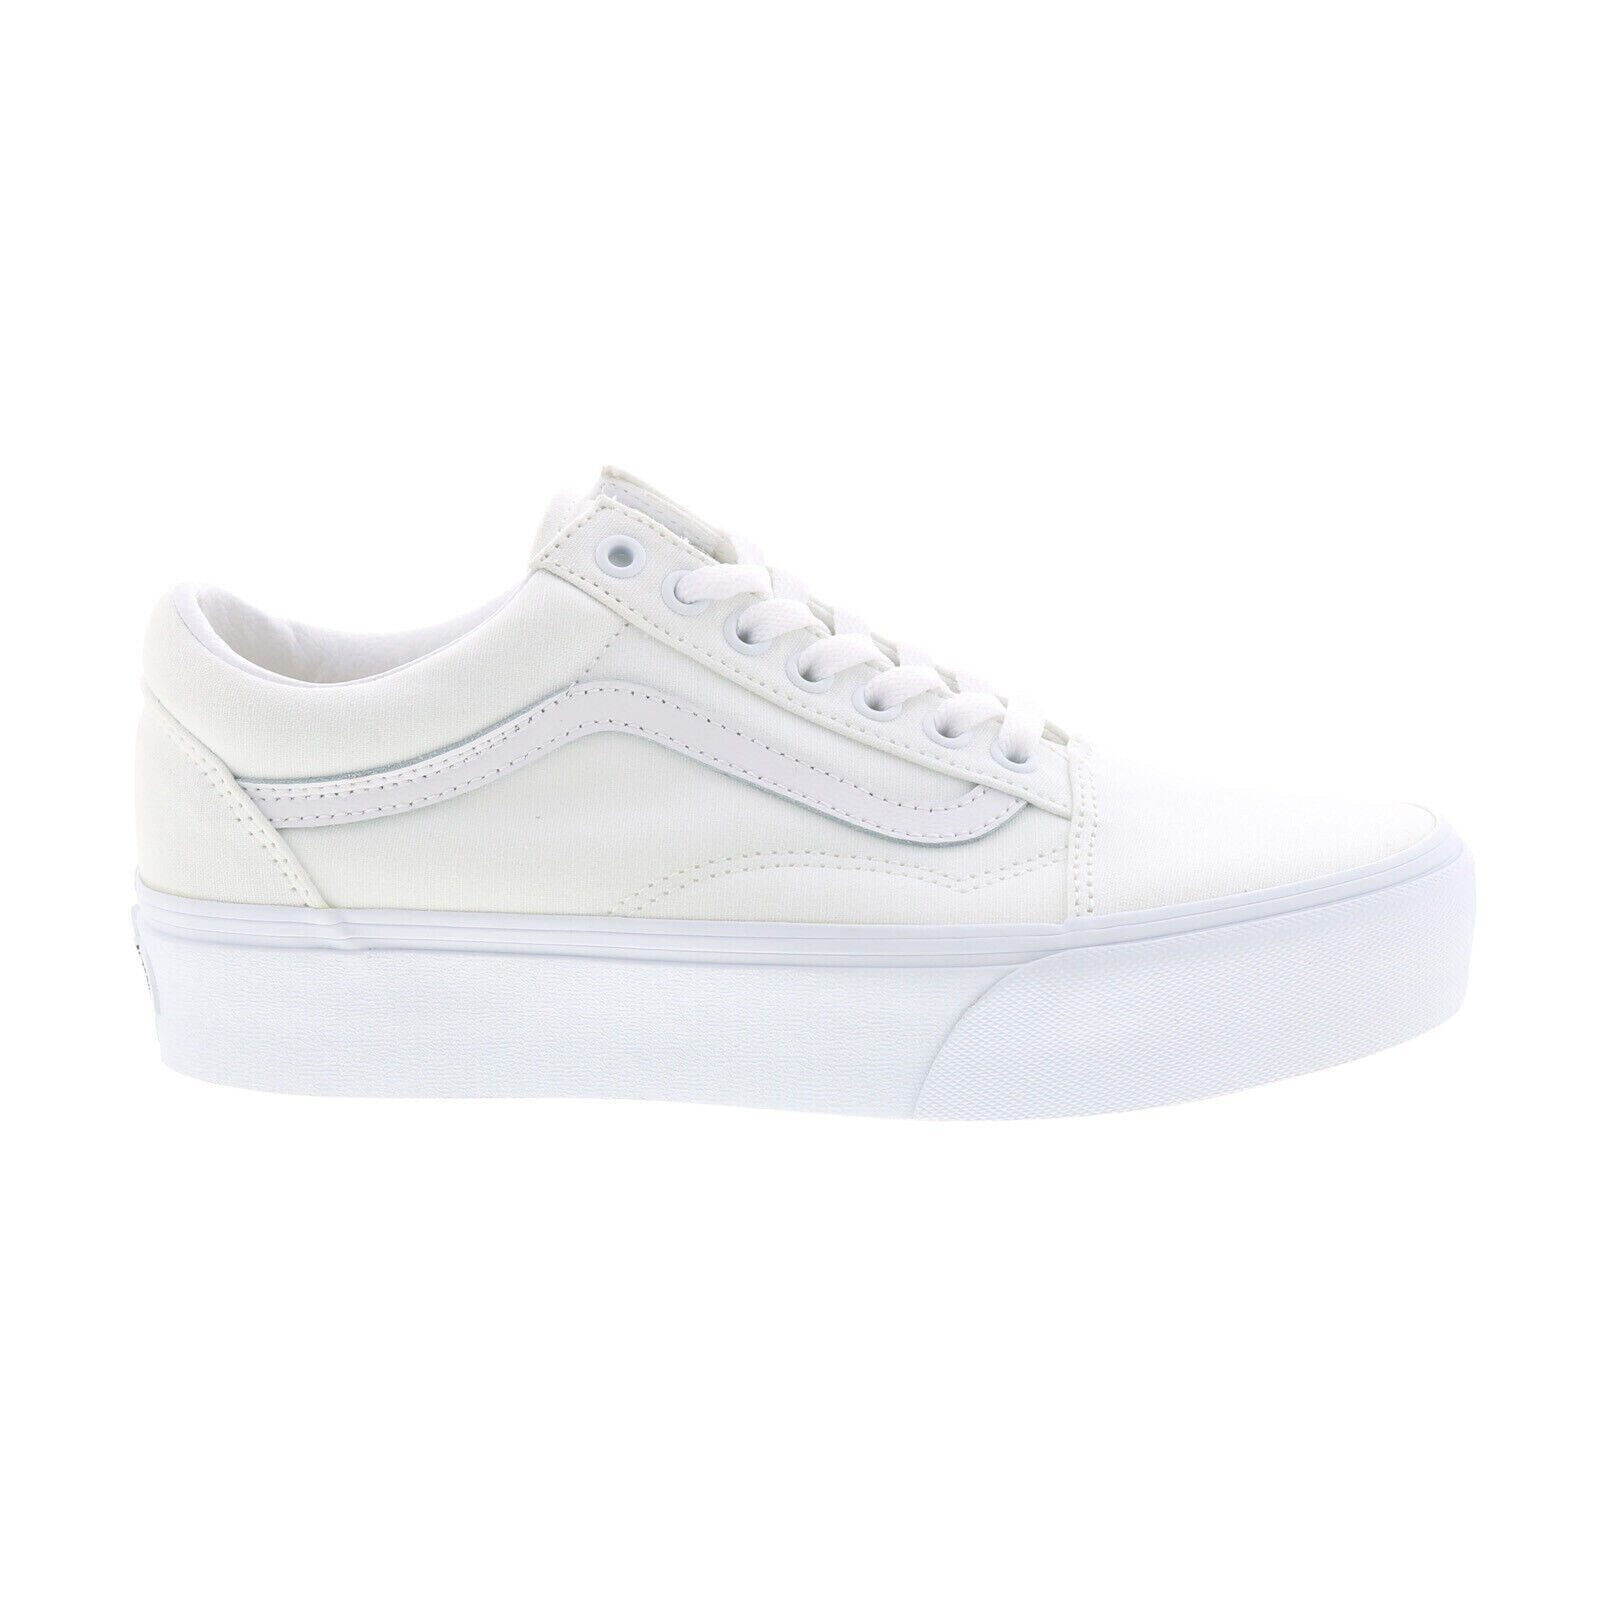 Vans Old Skool Plat VN0A3B3UW00 Mens White Canvas Lifestyle Sneakers Shoes 8